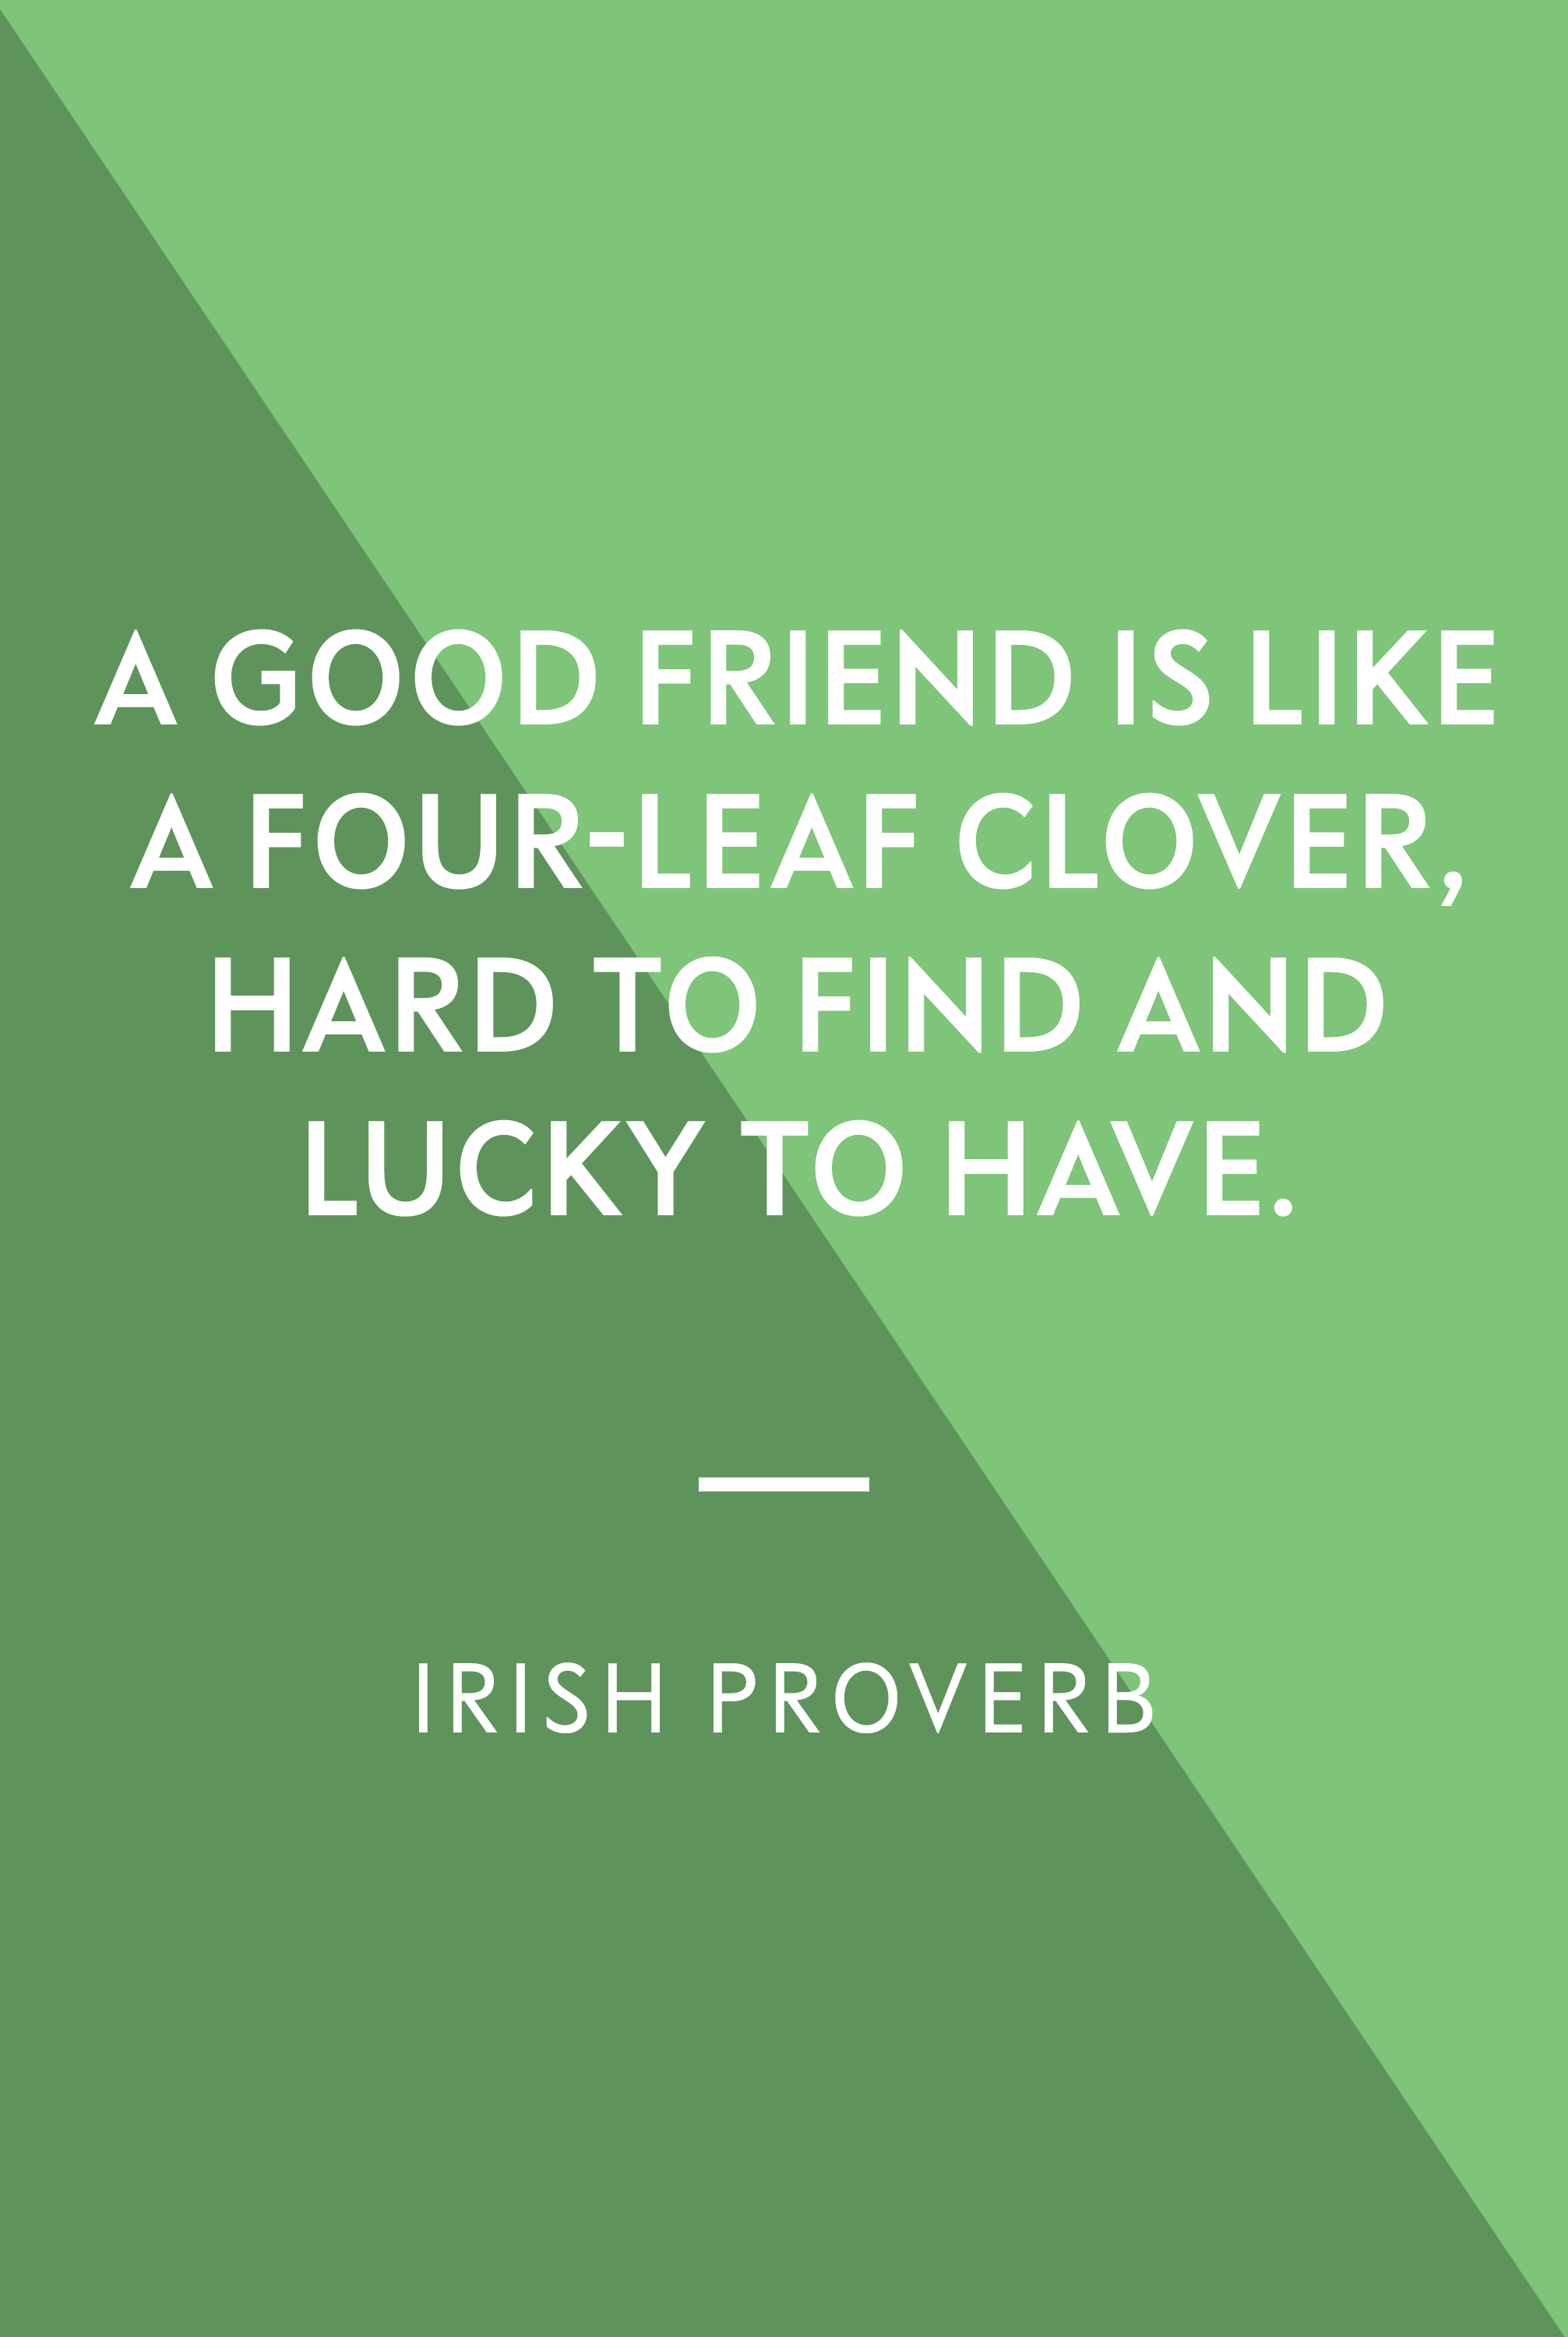 The Luck of the Irish: Phrases and Sounds for St. Patrick's Day